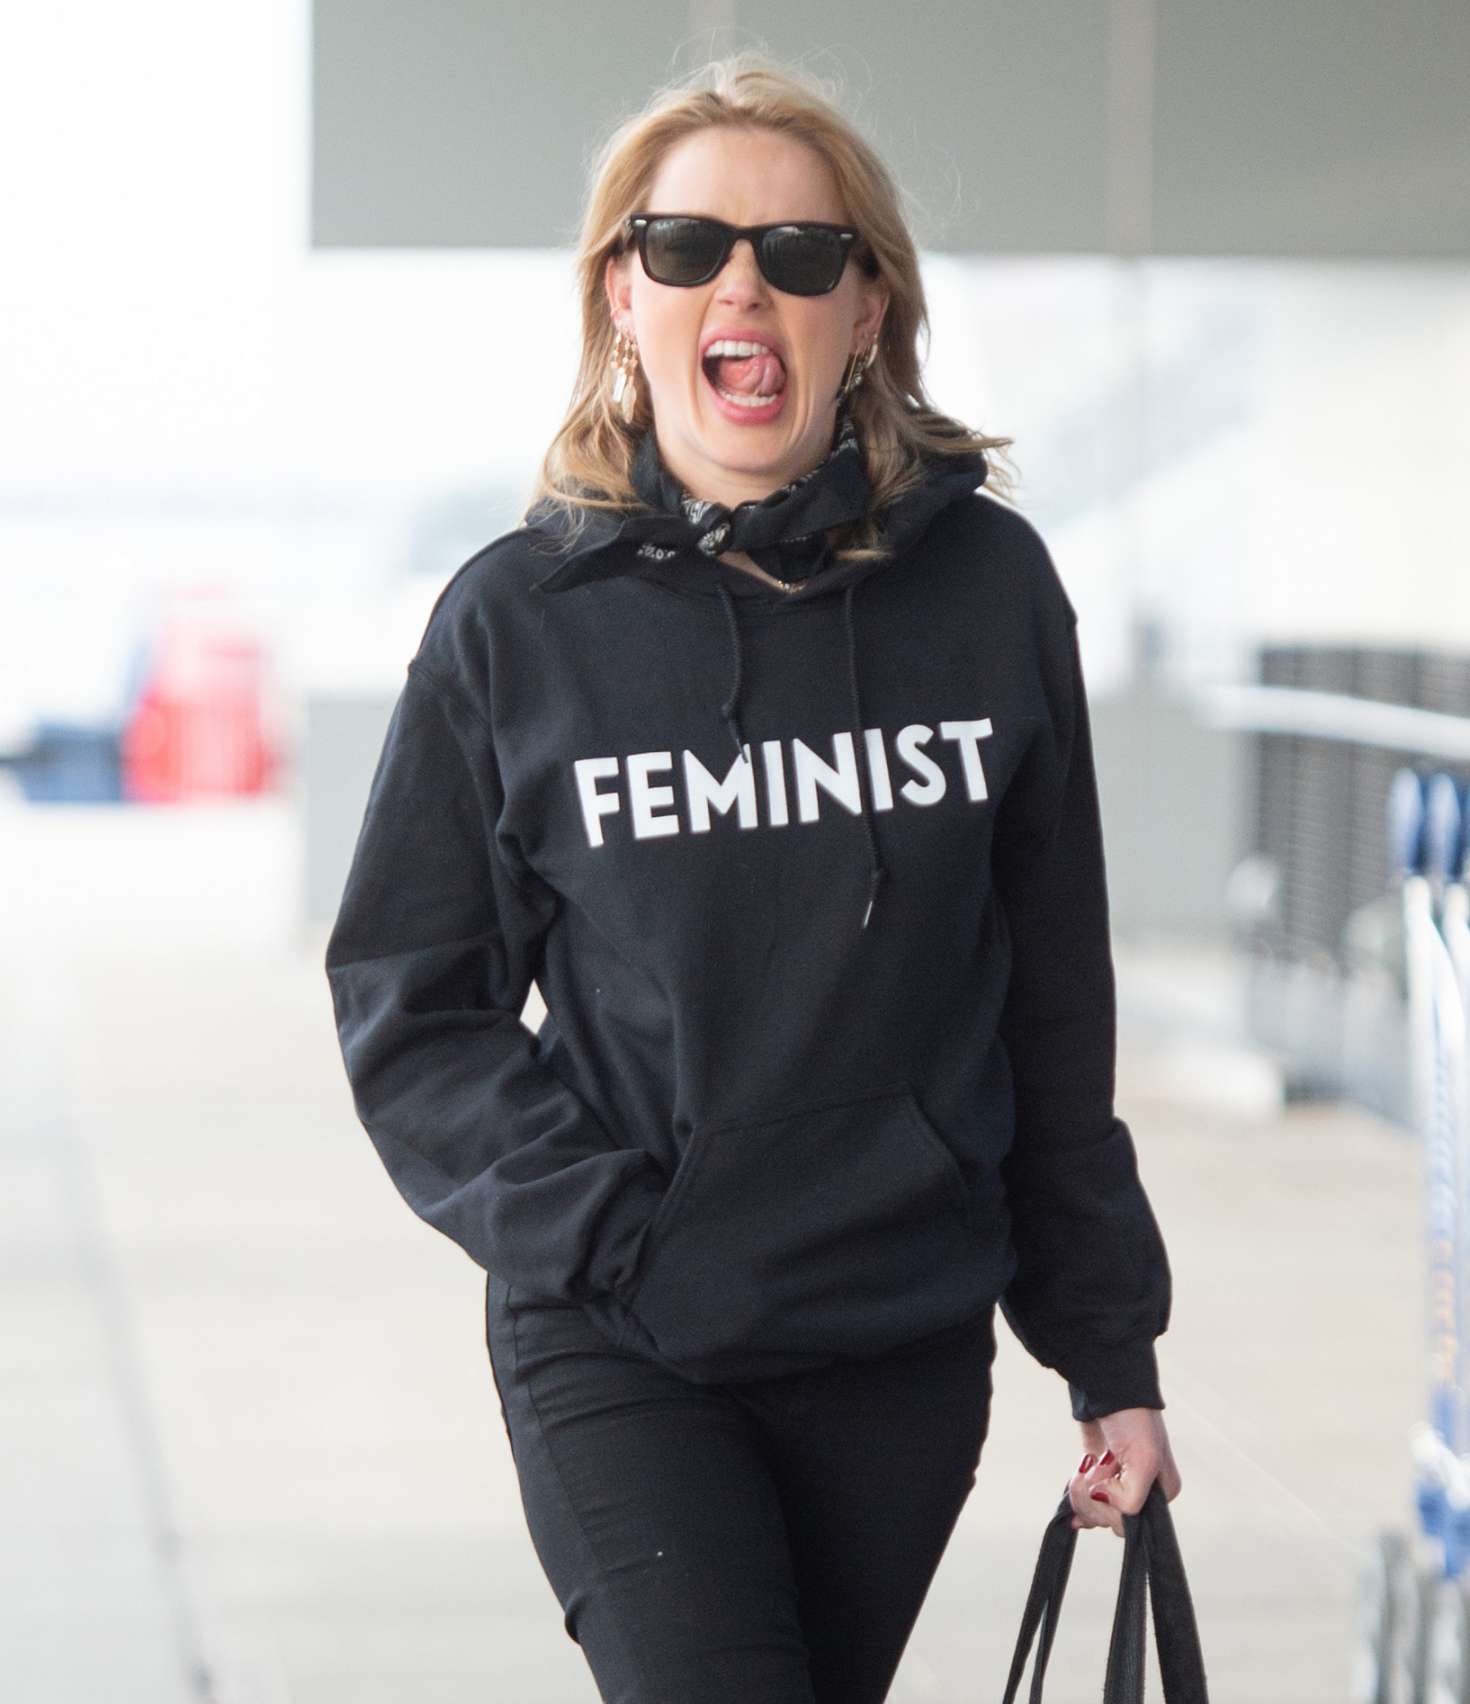 Amber Heard â€“ Arrives at JFK airport in New York